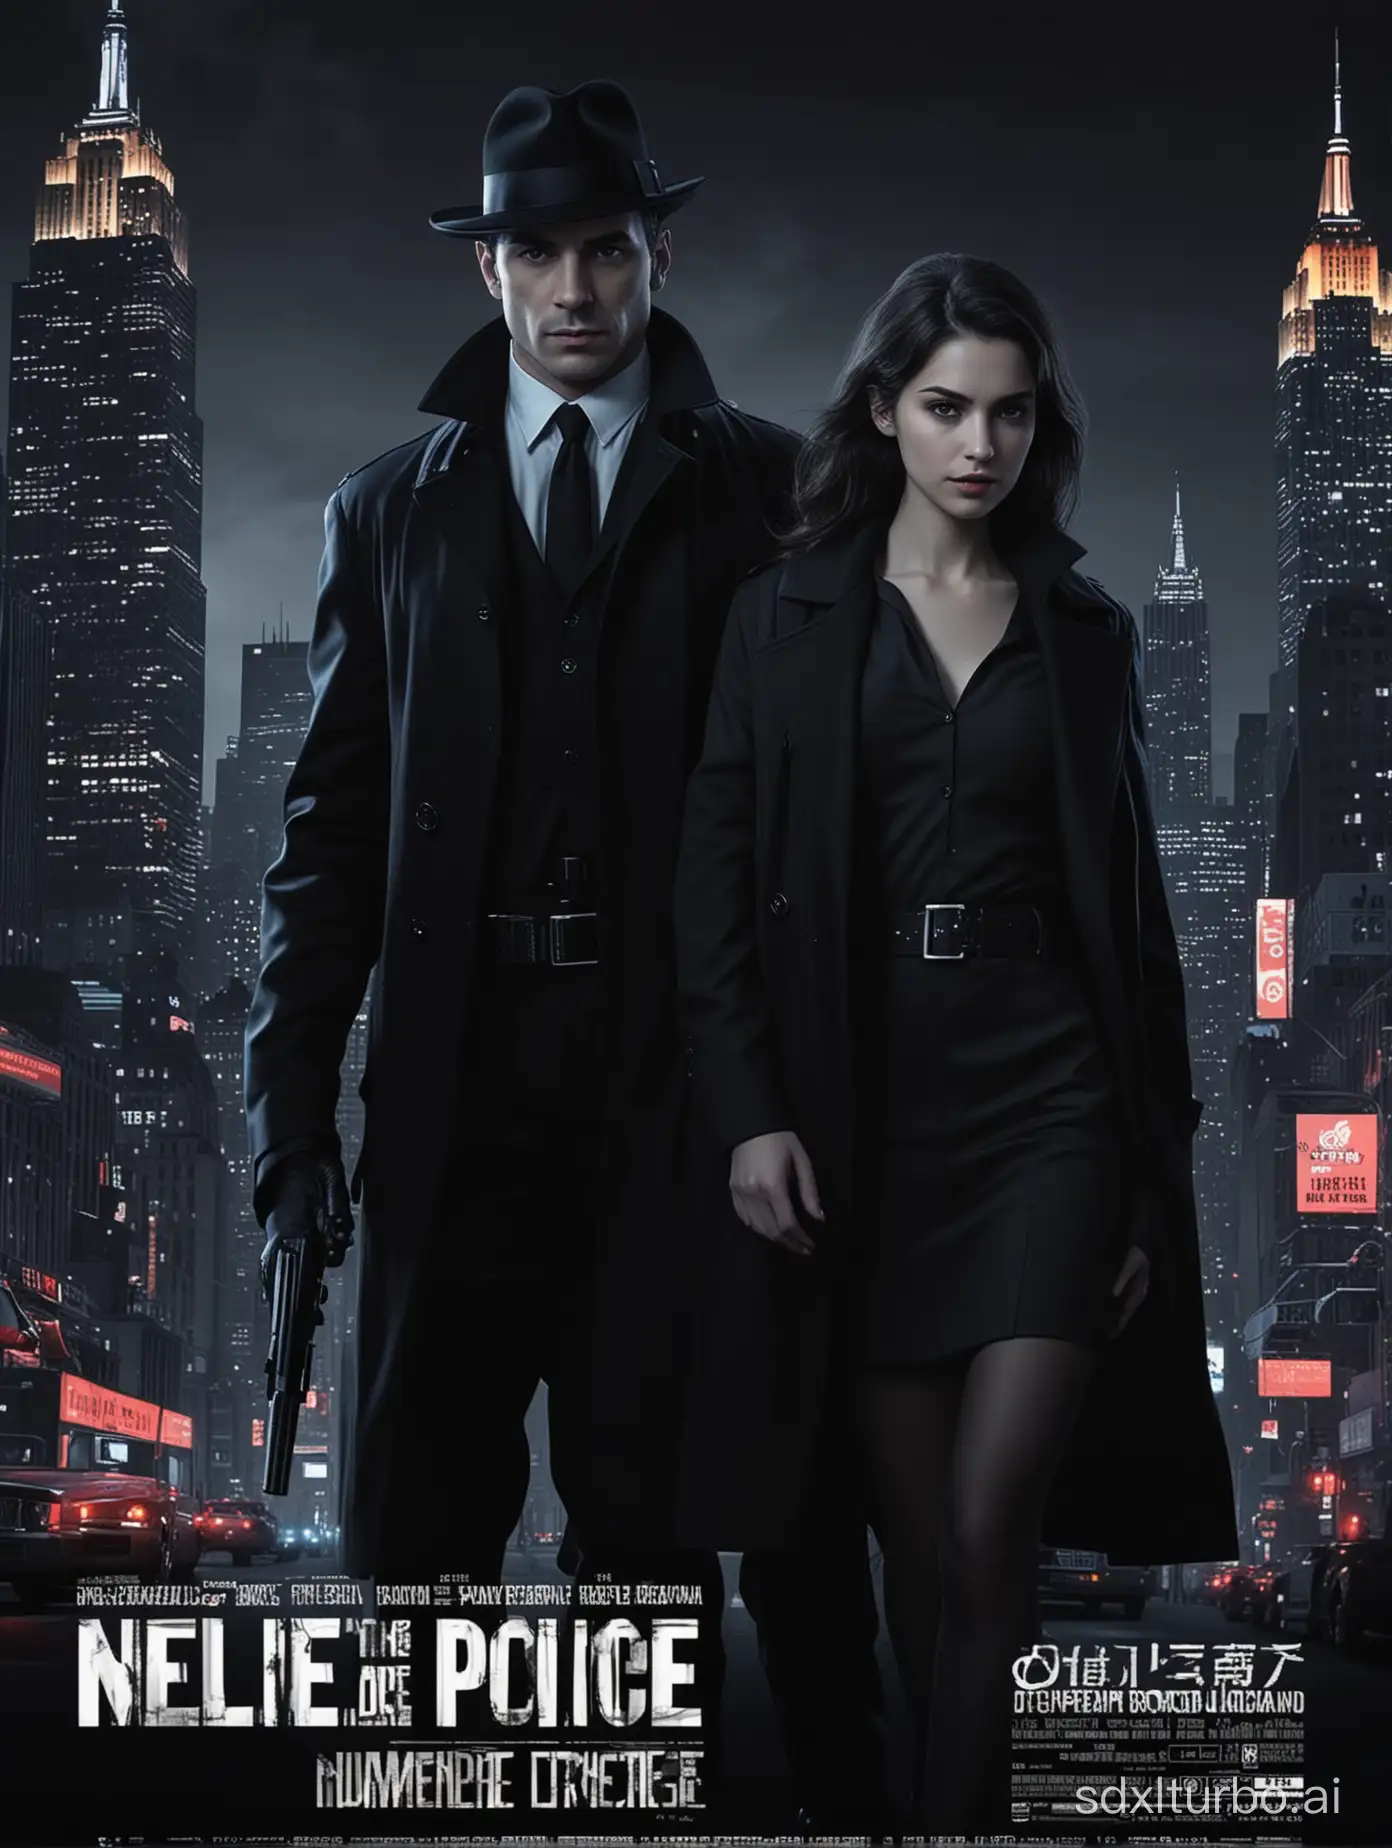 Modern-NYPD-Detective-and-Vampire-Girl-A-Night-of-Mystery-in-Gotham